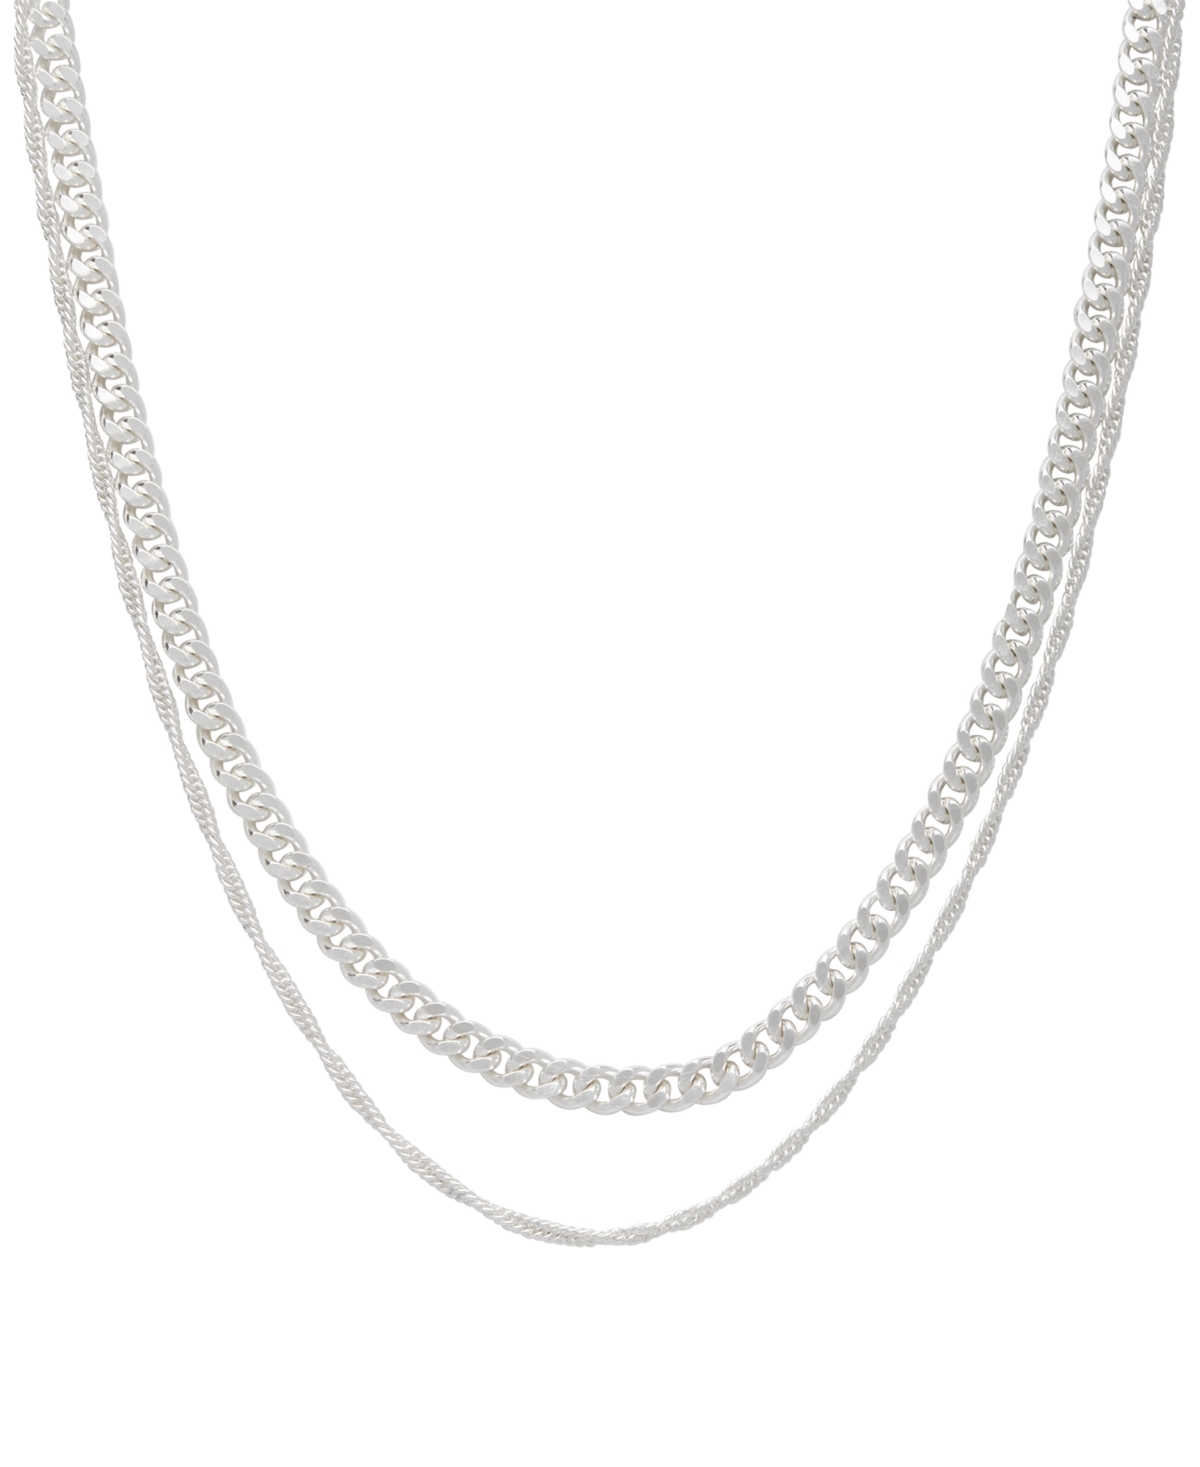 Women's Double Chain Necklace 16" + 2" extender and 18" + 2" extender - Fine Silver Plated